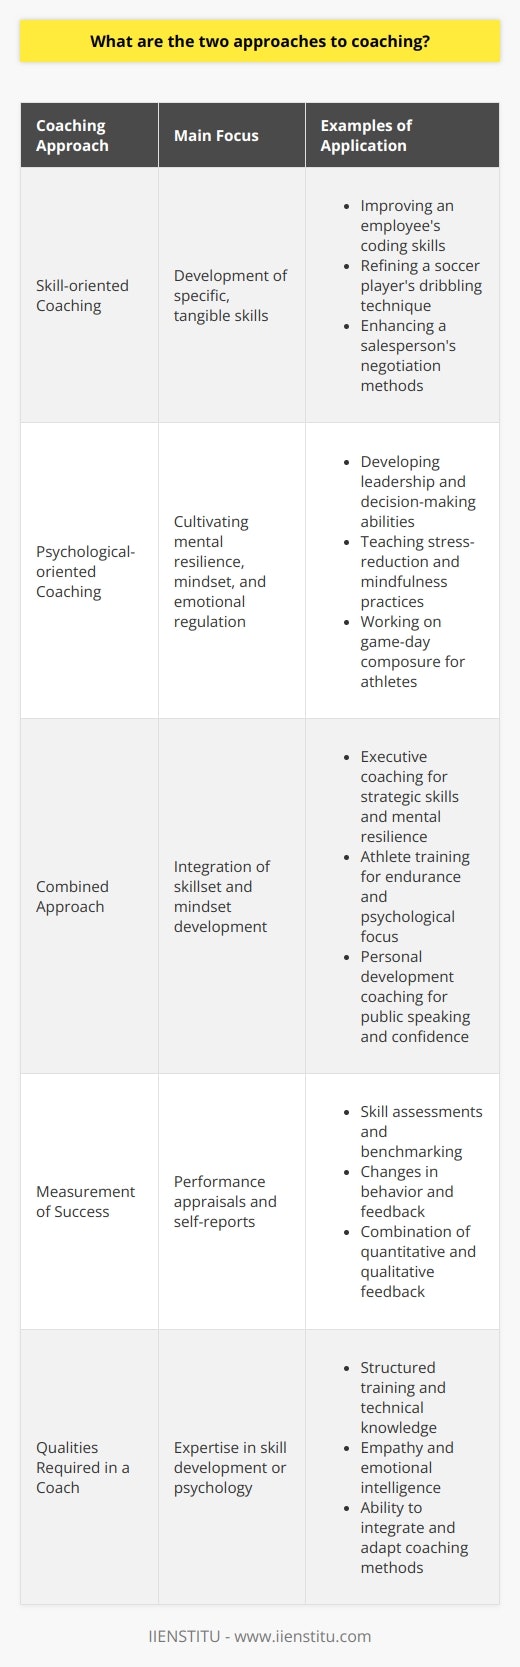 Coaching, an invaluable tool for personal and professional development, adopts multiple methodologies to cater to diverse needs. Among these, two primary approaches stand out: the skill-oriented approach and the psychological-oriented approach. Both paradigms serve different objectives and can be highly effective in fostering growth and excellence.Skill-oriented CoachingThis approach is centered on the development of concrete skills that are necessary for competency in a particular area. Skill-oriented coaching is tactical and often procedural, focusing on imparting new techniques, refining existing ones, and correcting inefficient or suboptimal practices. It’s akin to teaching someone how to use a tool or perfecting a technique. Practical, measurable, and often time-bound, this method thrives on continuous feedback and deliberate practice.In a professional context, such as a corporate environment or a specialized field like IT, skill-oriented coaching might involve improving an employee's project management capabilities, coding proficiency, or presentation skills. In the realm of sports, it translates to enhancing a player's specific athletic techniques like swimming strokes, soccer dribbling, or basketball shooting.The success of the skill-oriented approach can be relatively easily gauged through performance appraisals, skill assessments, and other benchmarking tools. This approach leans heavily on the expertise of the coach in the specific area of skill development and requires structured training programs tailored to the learner's needs.Psychological-oriented CoachingContrasting with the tangible focus of skill improvement, the psychological-oriented approach delves into the intangible yet critical aspects of human psychology. Here, the emphasis is on shaping the mindset, cultivating mental strength, and regulating emotions to achieve optimal performance. The objective is to foster a foundation of psychological well-being that supports various life and career phases.Coaches tailor their methods to the individual's psychological profile, leveraging techniques such as cognitive-behavioral strategies, mindfulness, emotional intelligence training, and stress-reduction practices. They often address issues like anxiety, motivation, confidence, and focus, which, though not always directly related to the specific skills at hand, significantly impact overall performance and satisfaction.For example, in a business setting, psychological-oriented coaching might concentrate on developing leadership qualities, improving decision-making under stress, or overcoming the fear of public speaking. In sports psychology, it may involve techniques to visualize success, maintain game-day composure, or recover mentally from an injury.This approach requires deep empathy, a non-judgmental attitude, and the ability to foster self-awareness and emotional growth. As the outcomes of psychological-oriented coaching are not as readily quantifiable as those of the skill-oriented approach, success is often measured through self-reports, changes in behavior, and feedback from others.Integrating Skill-oriented and Psychological-oriented ApproachesWhile the skill-oriented and psychological-oriented approaches stand on their own merits, an integrated coaching strategy that combines both can be particularly powerful. A comprehensive coaching program that addresses both skillsets and mindset can lead to profound and sustainable growth and performance improvement.For instance, an executive could be coached on the practical skills of strategic planning and negotiation, while simultaneously working on mental resilience and leadership presence. Similarly, an athlete might train for endurance and technique while also developing focus, determination, and the ability to deal with competitive pressure.Ultimately, the choice between skill-oriented and psychological-oriented coaching, or a combination thereof, depends on the unique objectives, challenges, and contexts within which the individual operates. Both approaches offer valuable pathways to mastery and empowerment, contributing to the multifaceted process of personal and professional evolution.